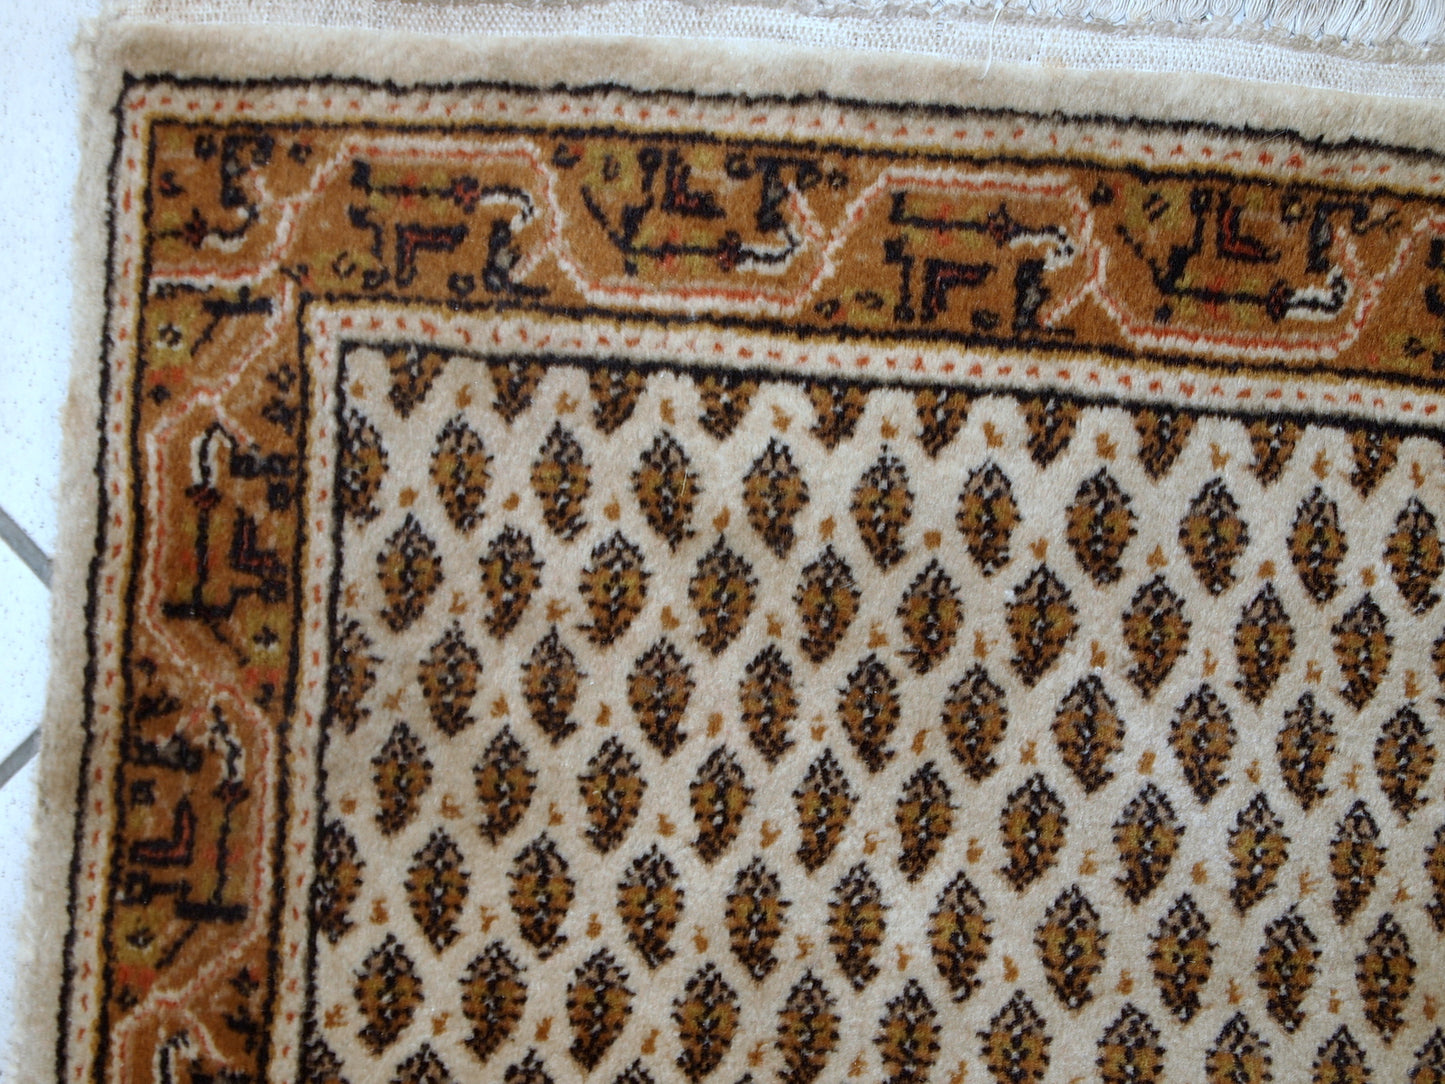 Vintage Indian rug in the style of Persian Seraband. Repeating pattern on the white field, the border is geometric in brown and olive shades. it is in original good condition with full thick pile.